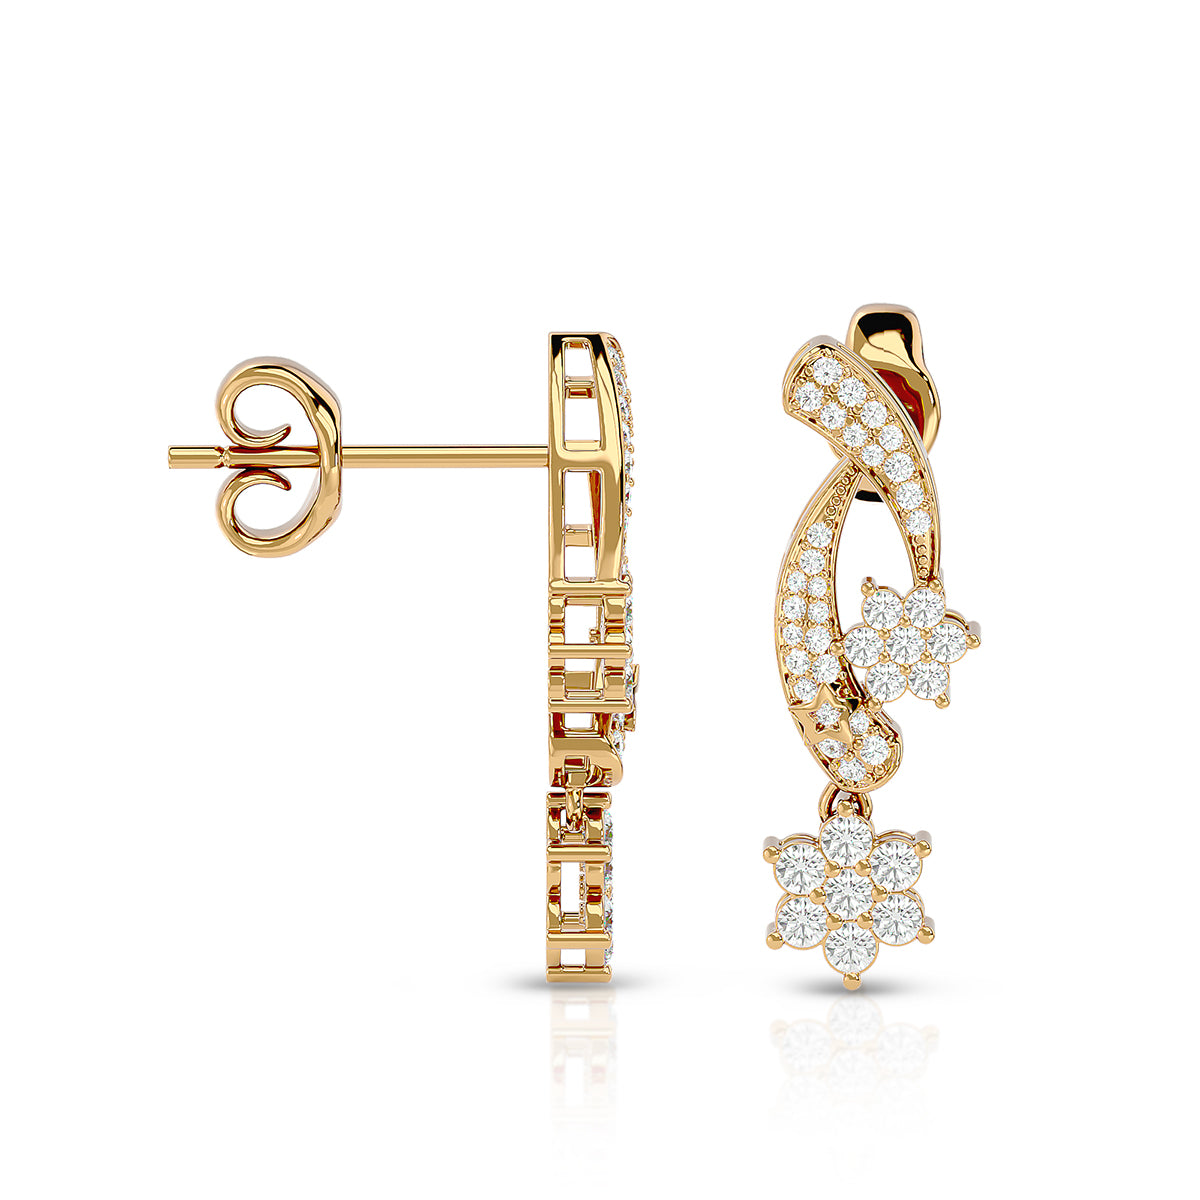 Persona Earrings 18K Gold With Diamonds